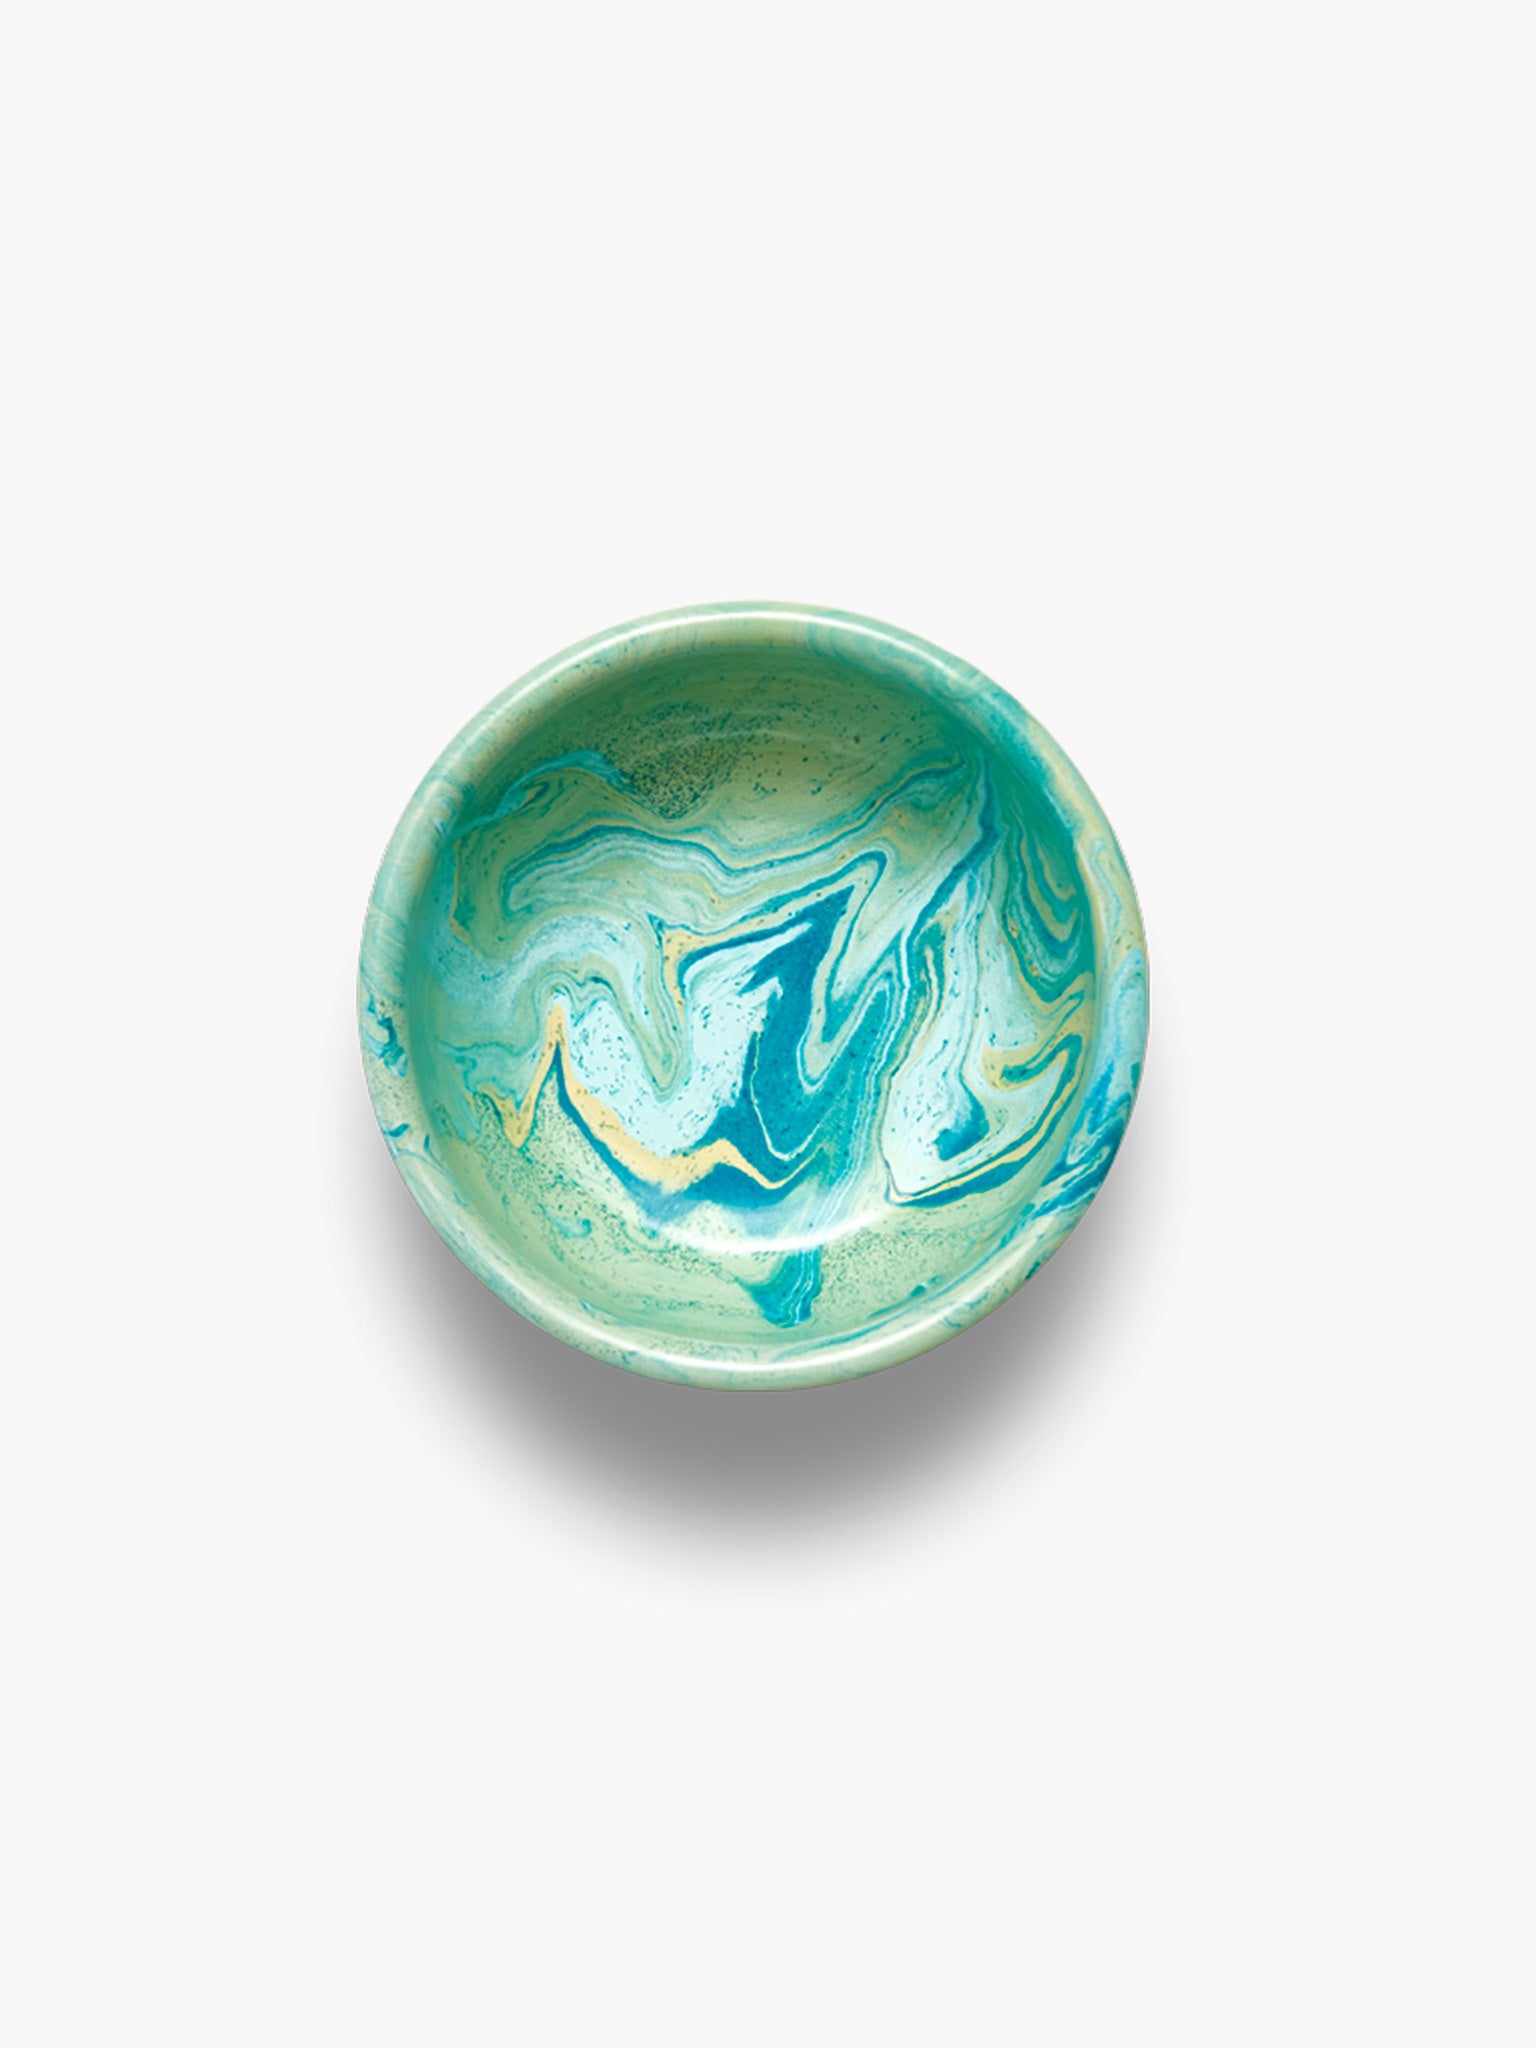 Marble Bowl Small (12cm) - Mint Green